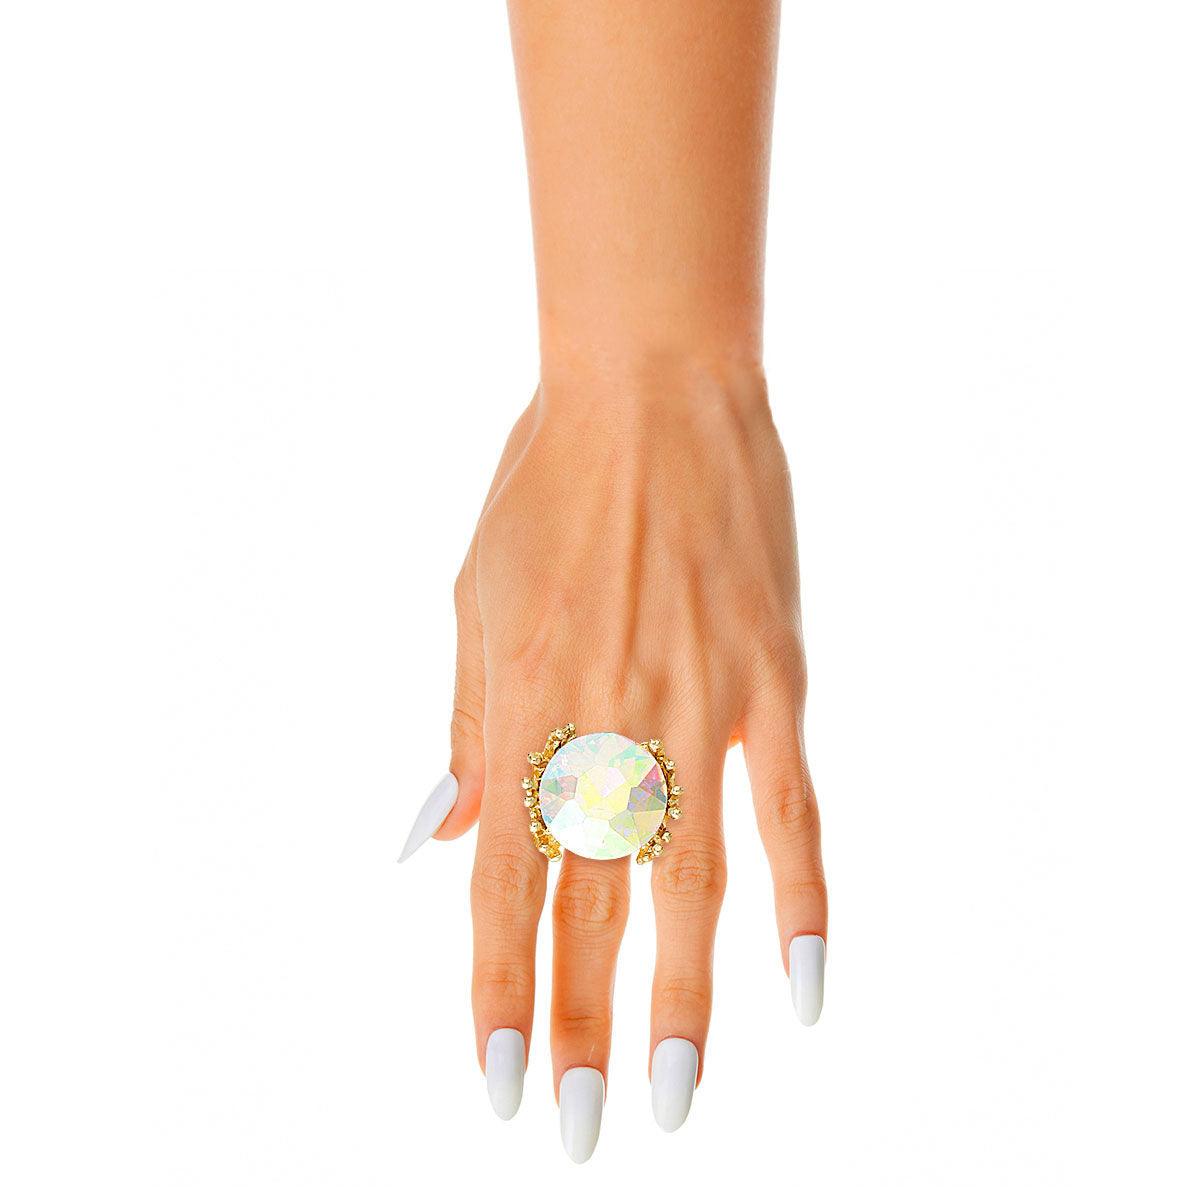 Aurora Borealis Branch Ring: Add Sparkle to Your Style